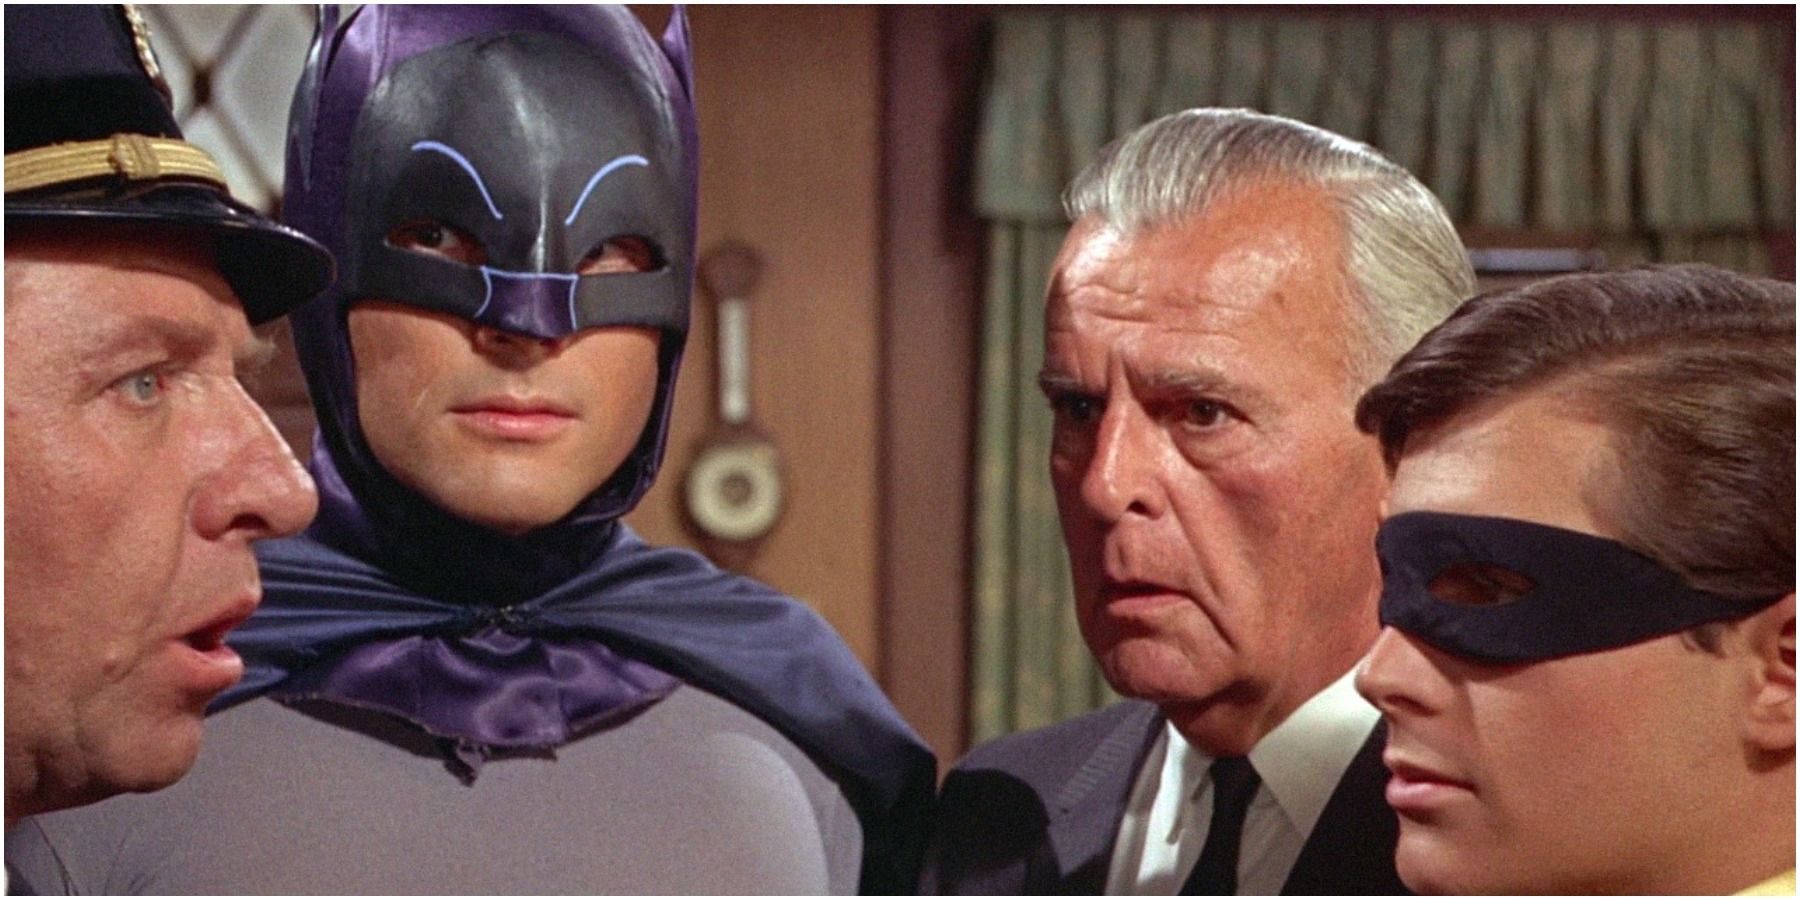 Batman Surrounded By His Allies from the 1966 Show